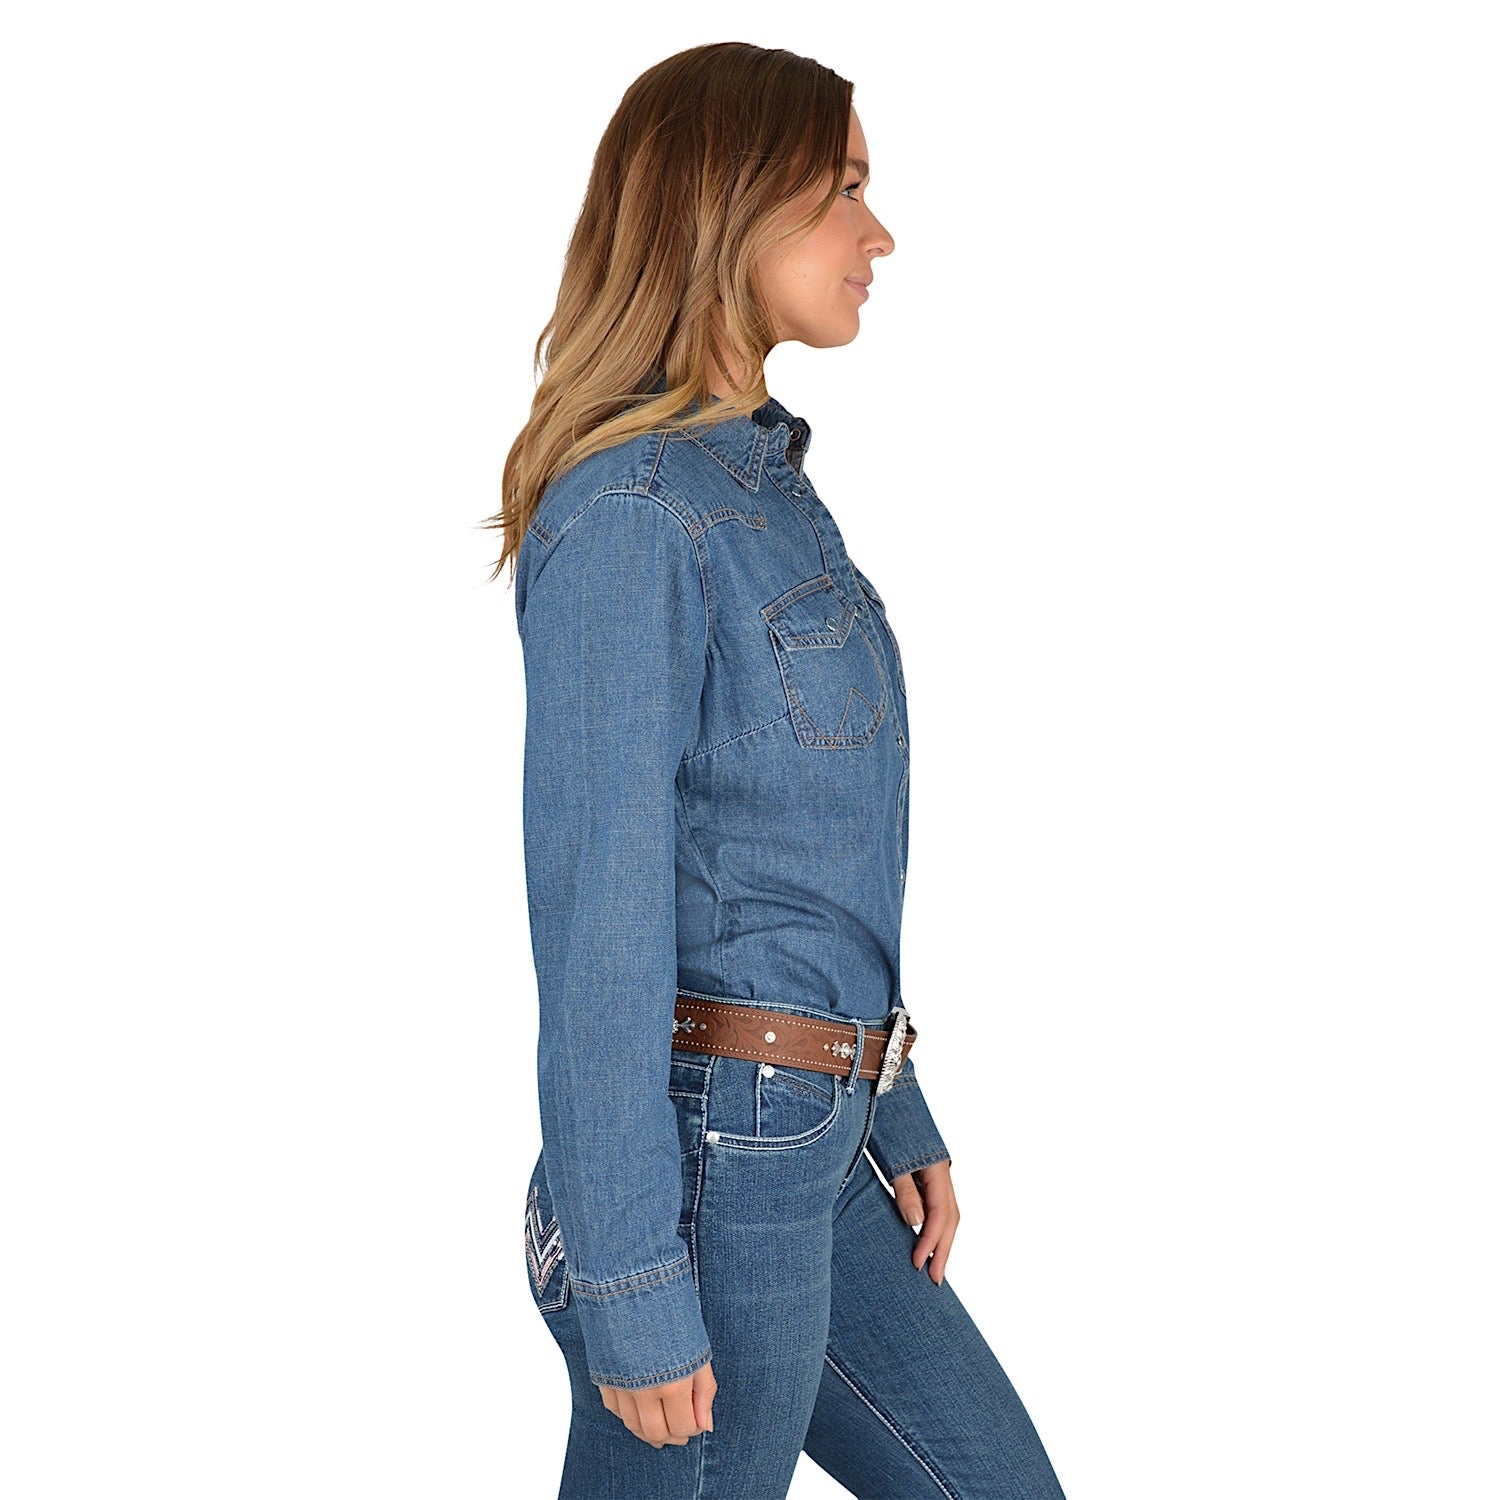 Womens Summer Denim Shirt with Back Split Casual Long Sleeve Turn Down  Collar Jean Blouse Tops with Pockets Blue at Amazon Women's Clothing store